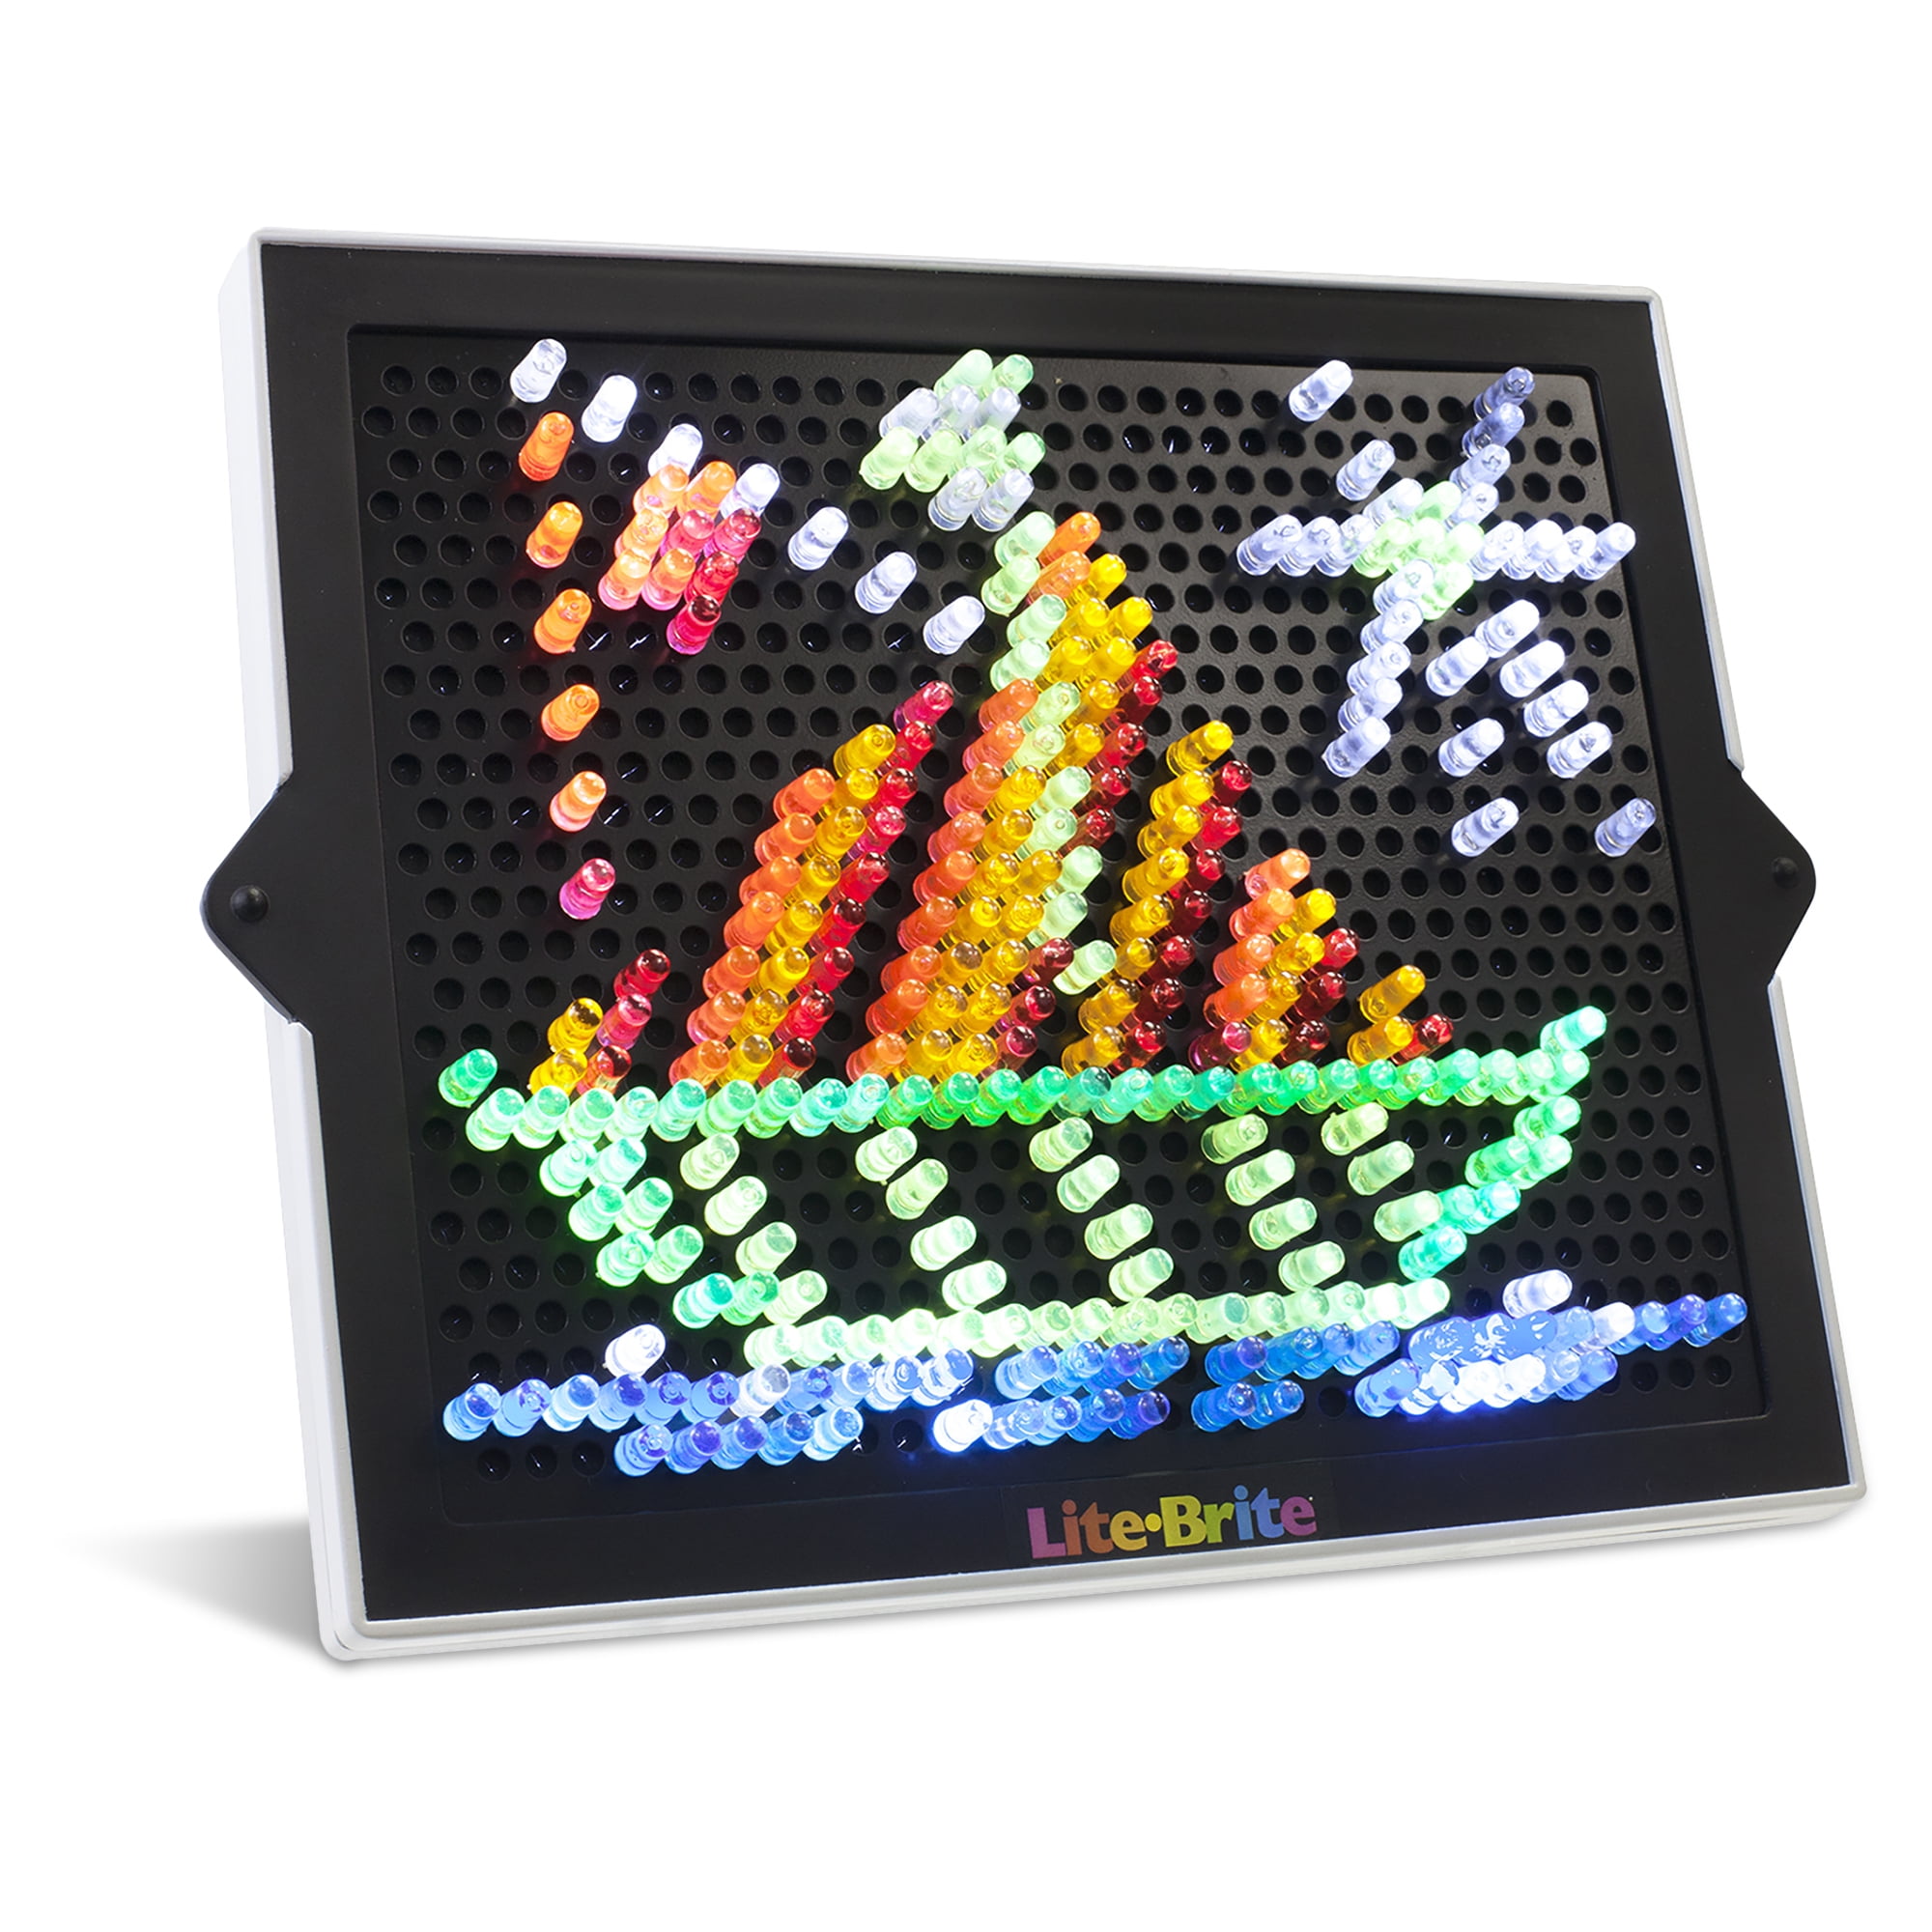 basic-fun-02215-lite-brite-ultimate-classic-toy-for-sale-online-good